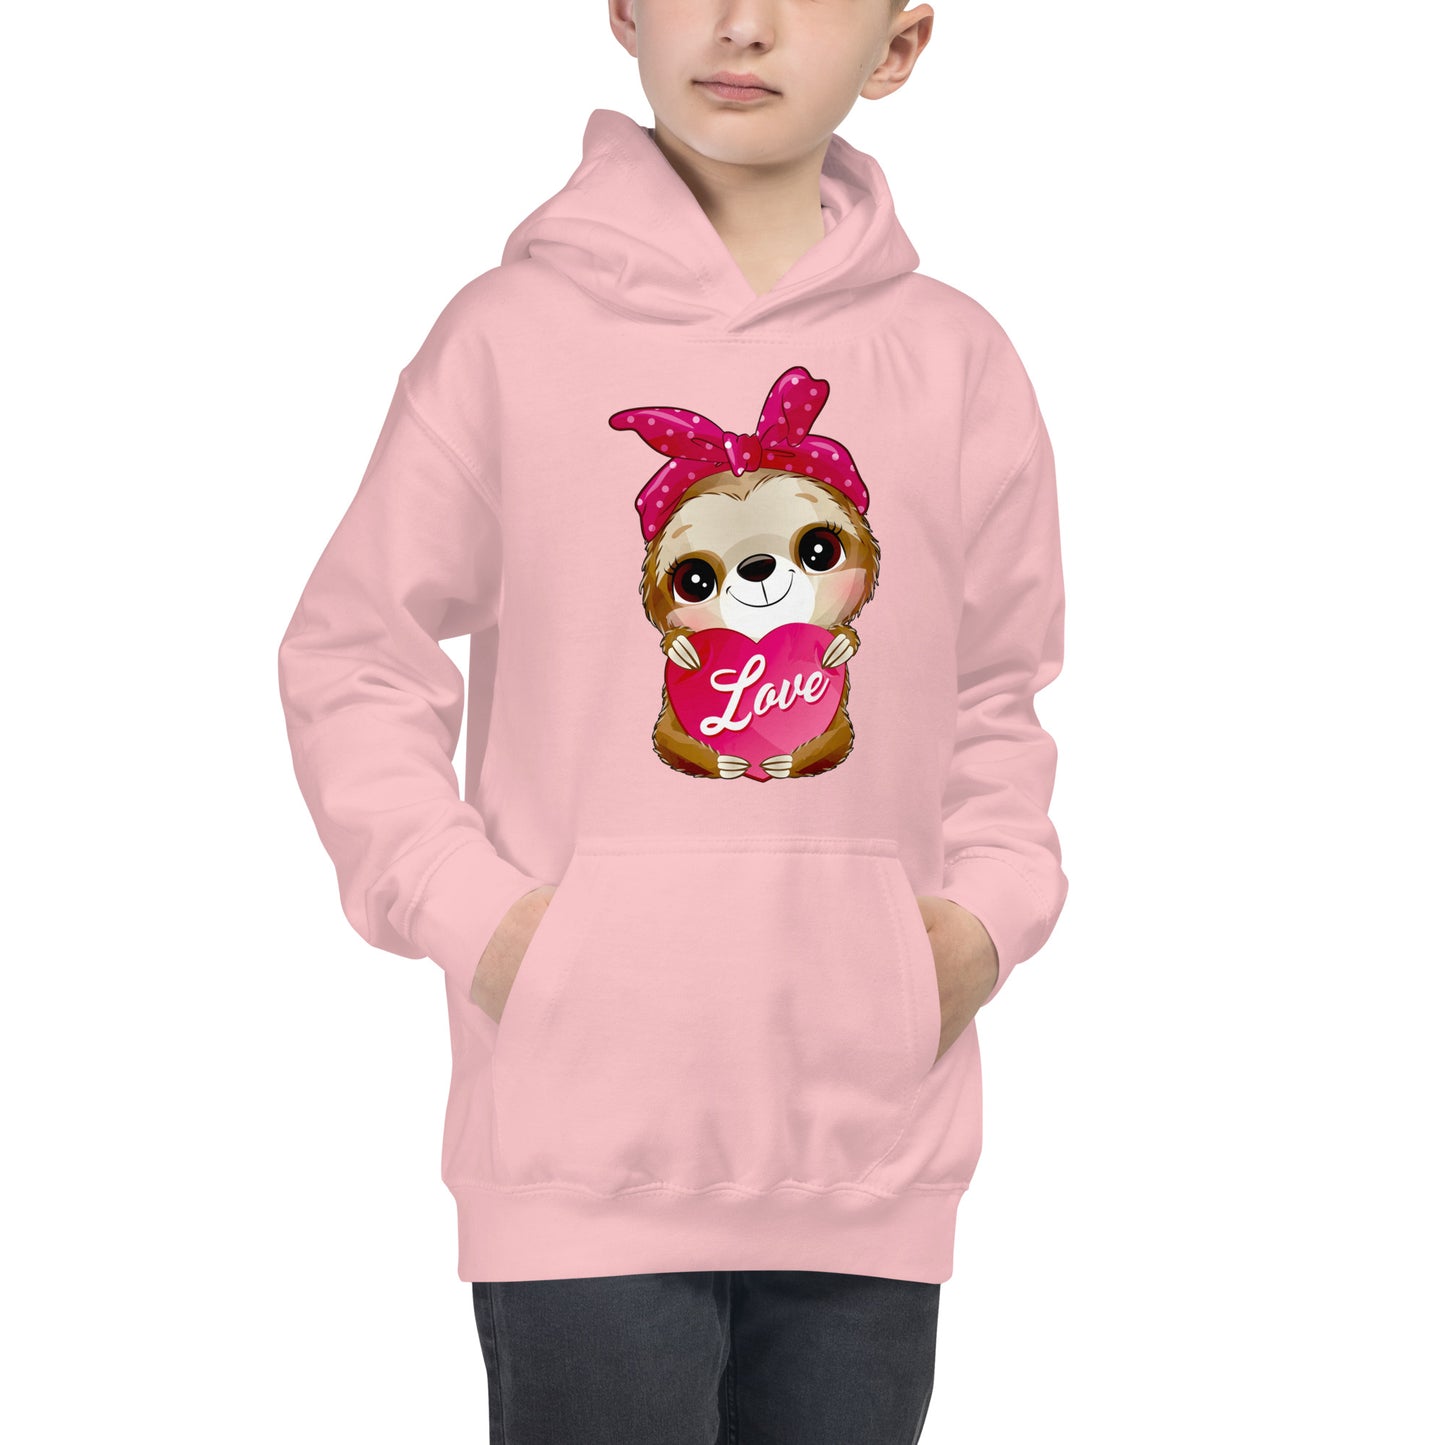 Sloth with Heart Hoodie, No. 0493